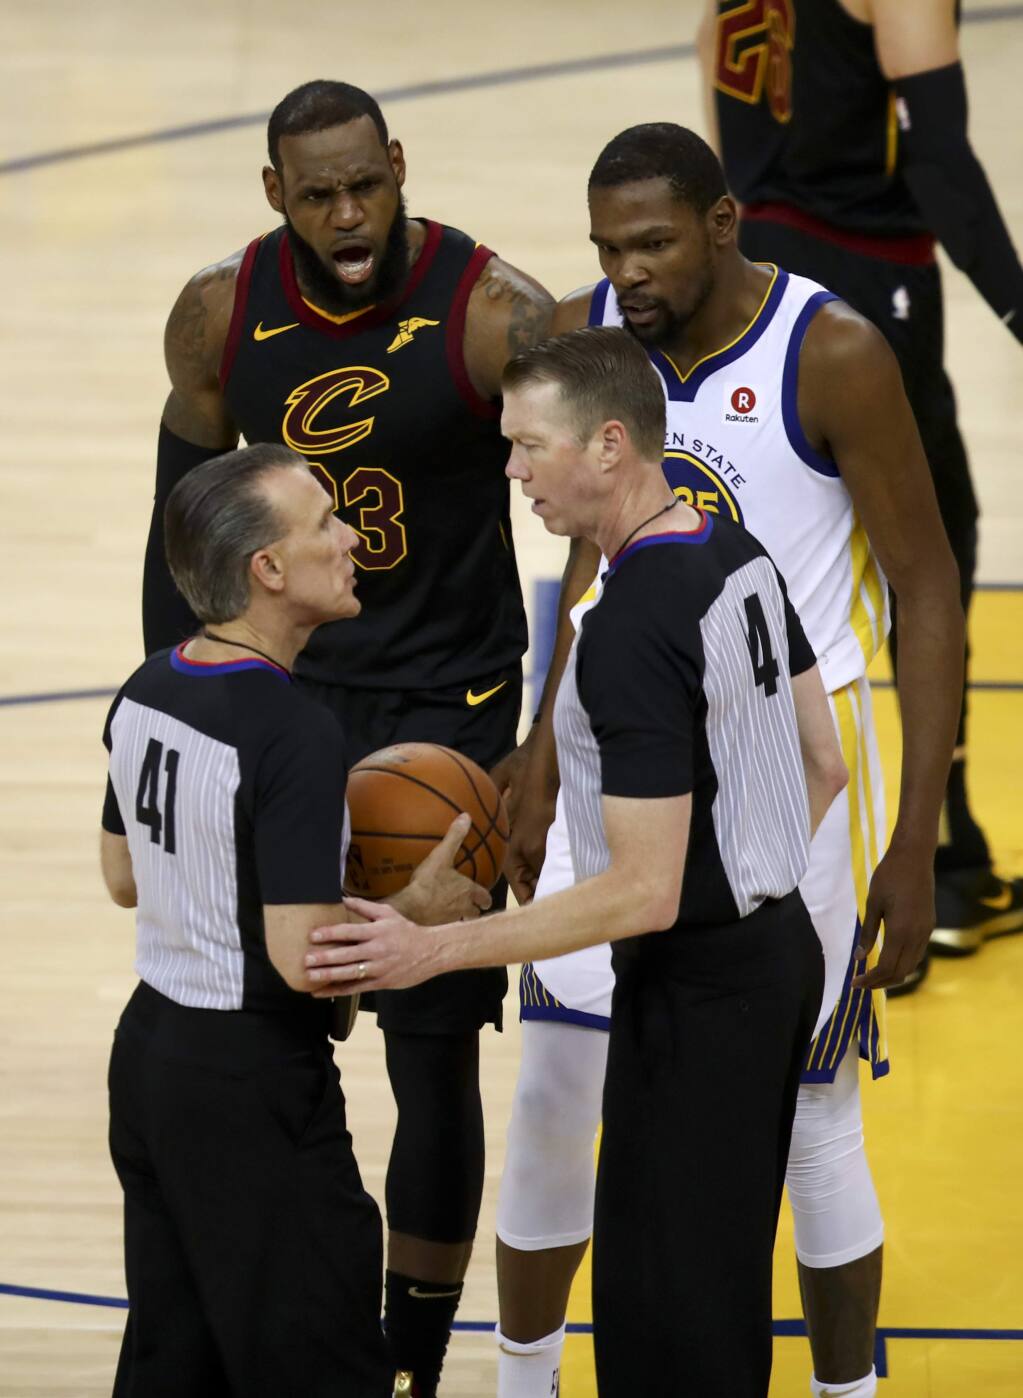 Nevius: NBA players, refs need to figure out their issues